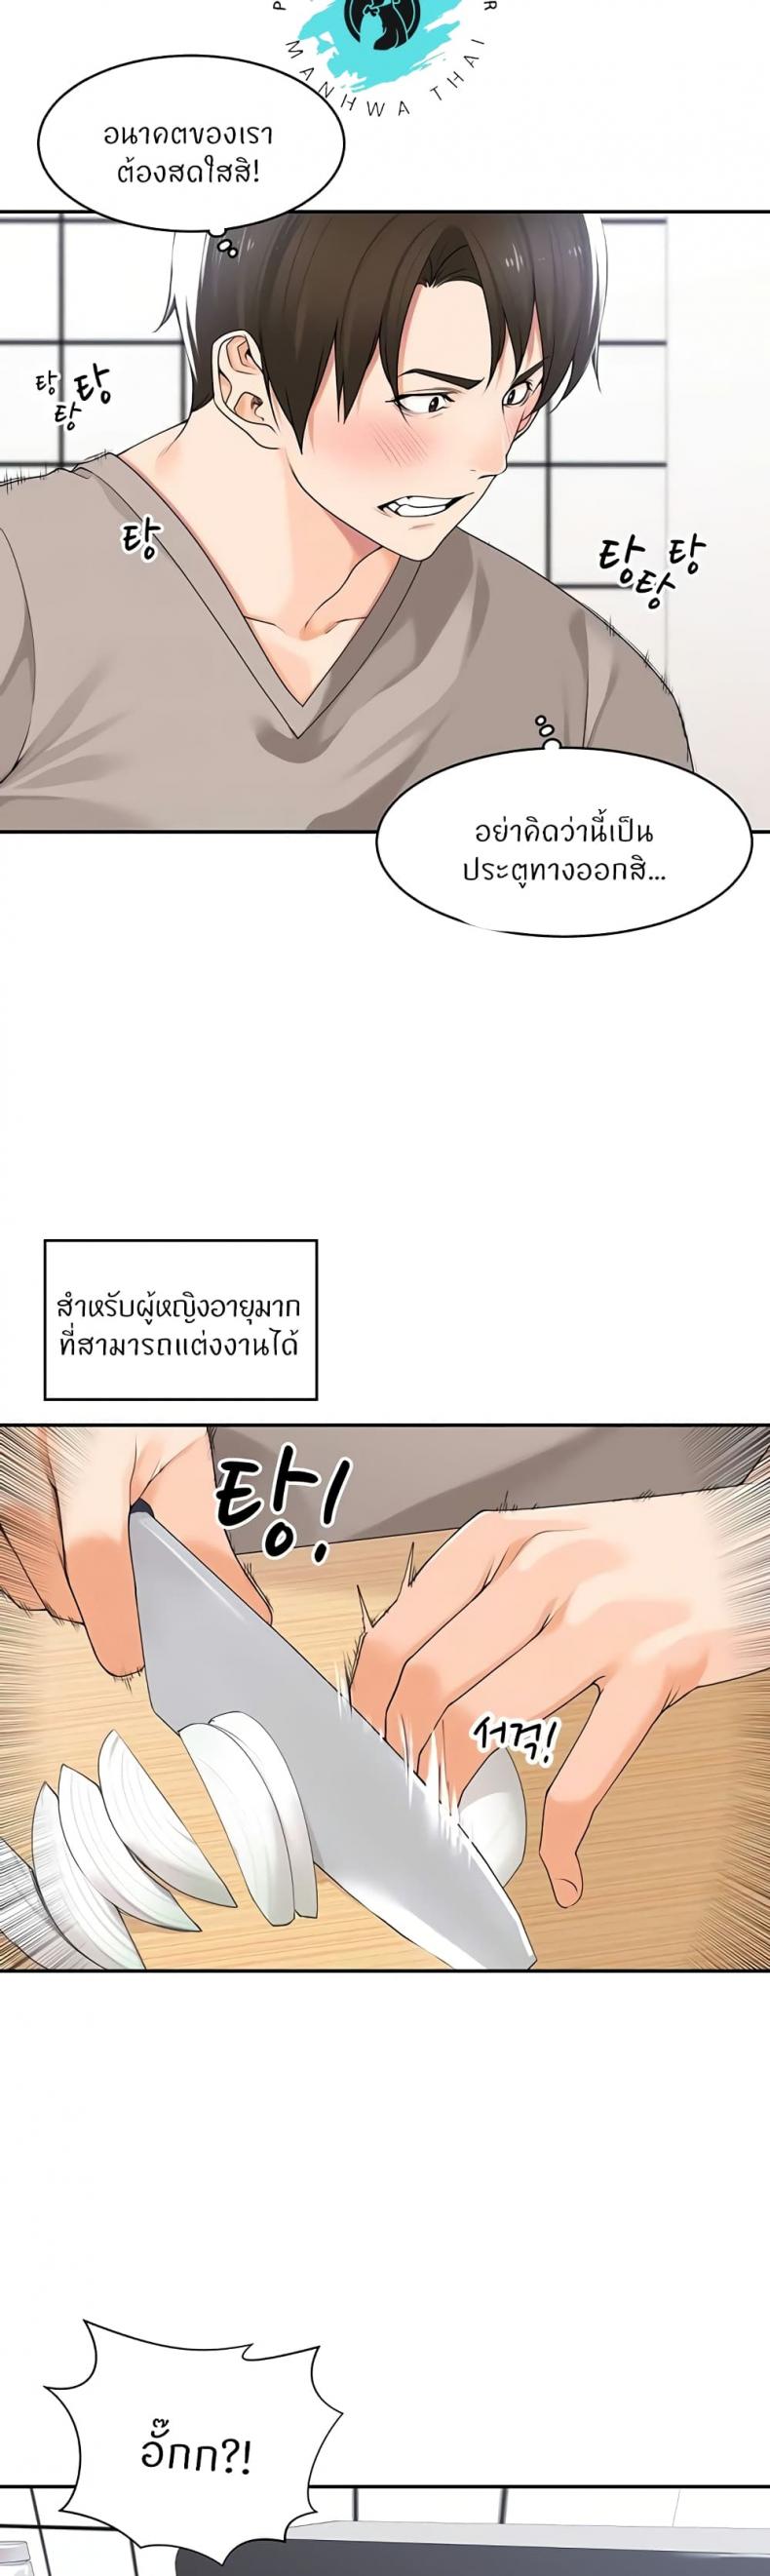 Manager, Please Scold Me 9 ภาพที่ 4